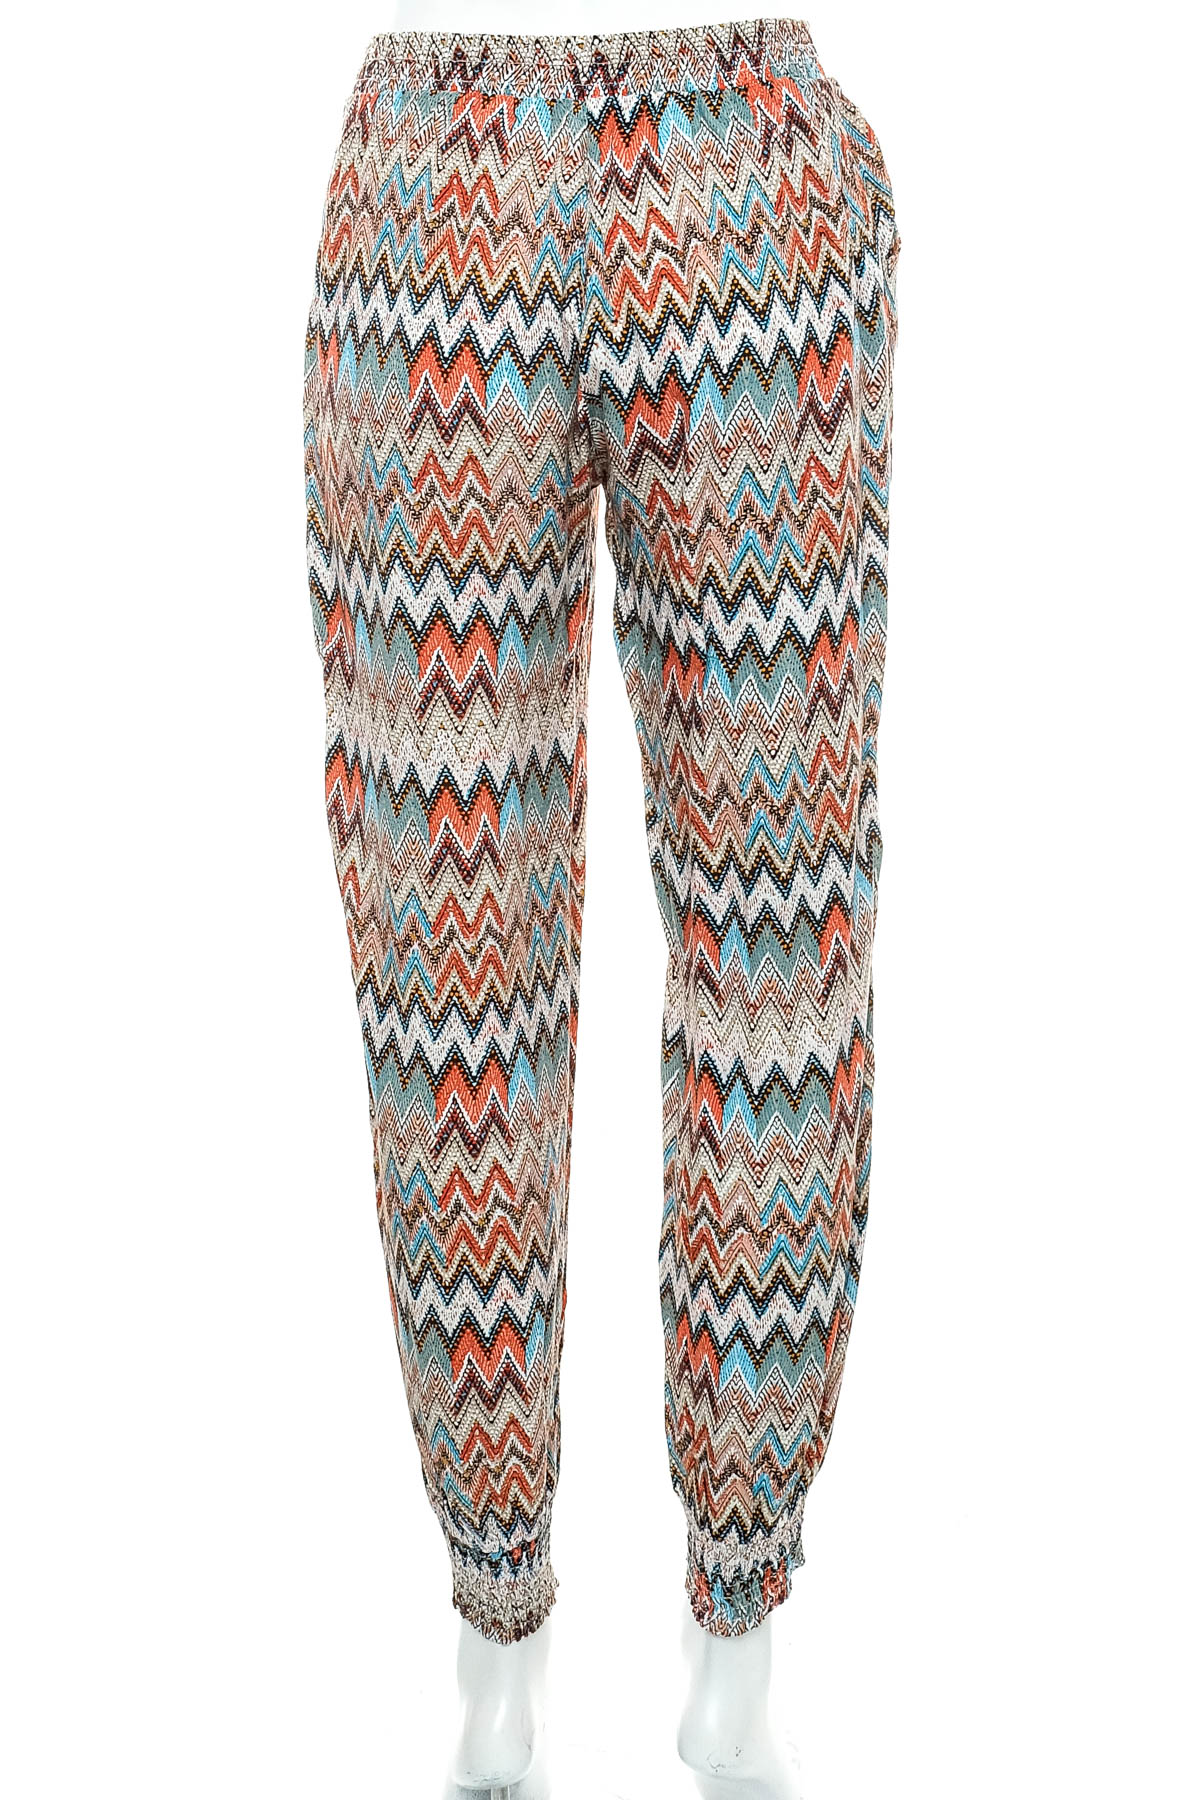 Women's trousers - Orcelly - 1